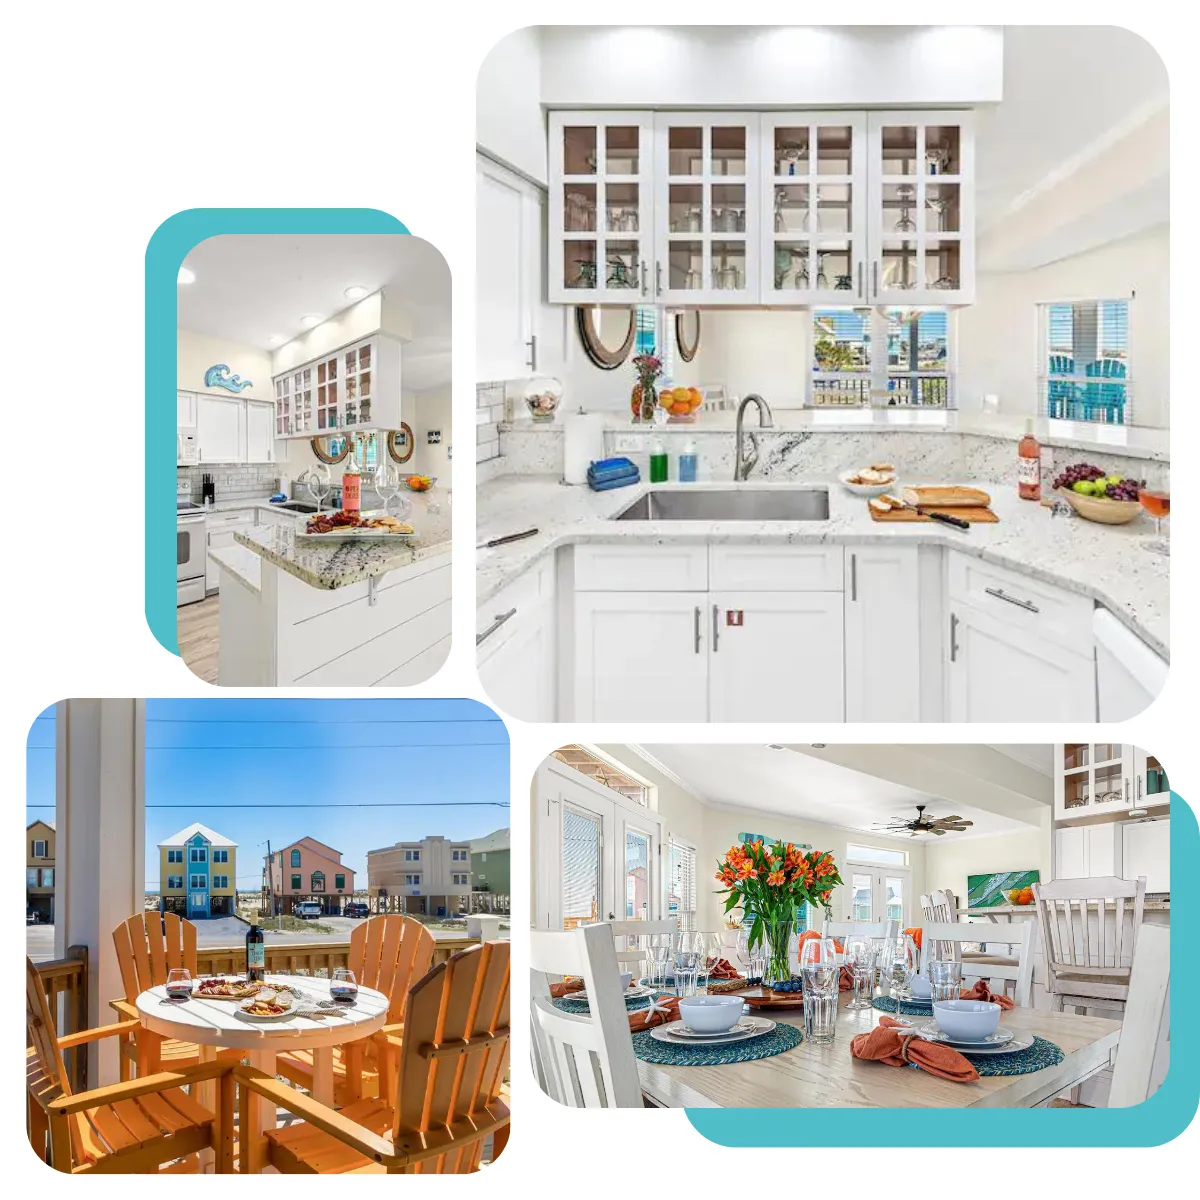 "Dune Just Fine" offers a cozy home with comfy spots inside and out, a handy kitchen with all you need, a sunny dining area, and a relaxing living room with Gulf views.